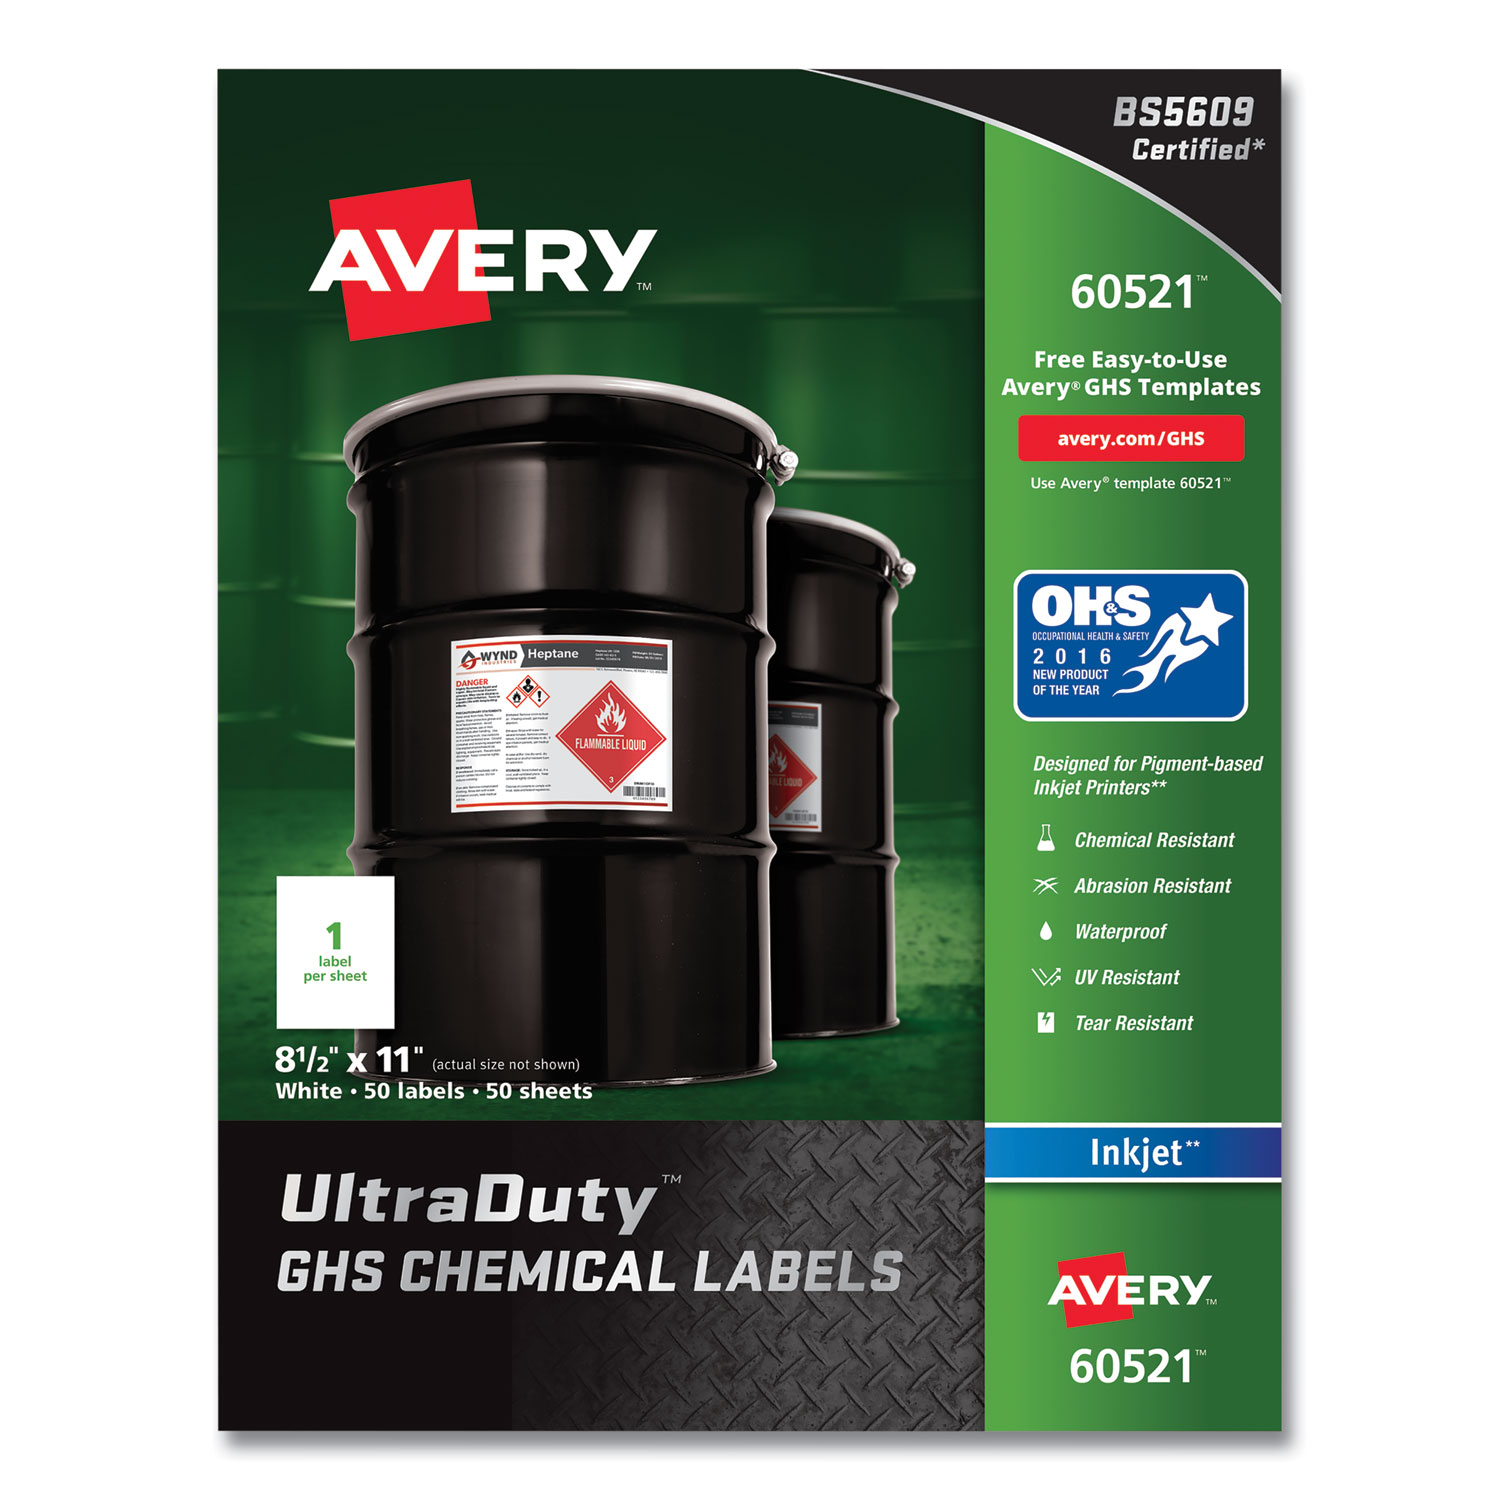 Avery UltraDuty GHS Labels Waterproof Pack of 1200 White Labels for Use with Laser Printers 1 X 1 Inch Square Labels 